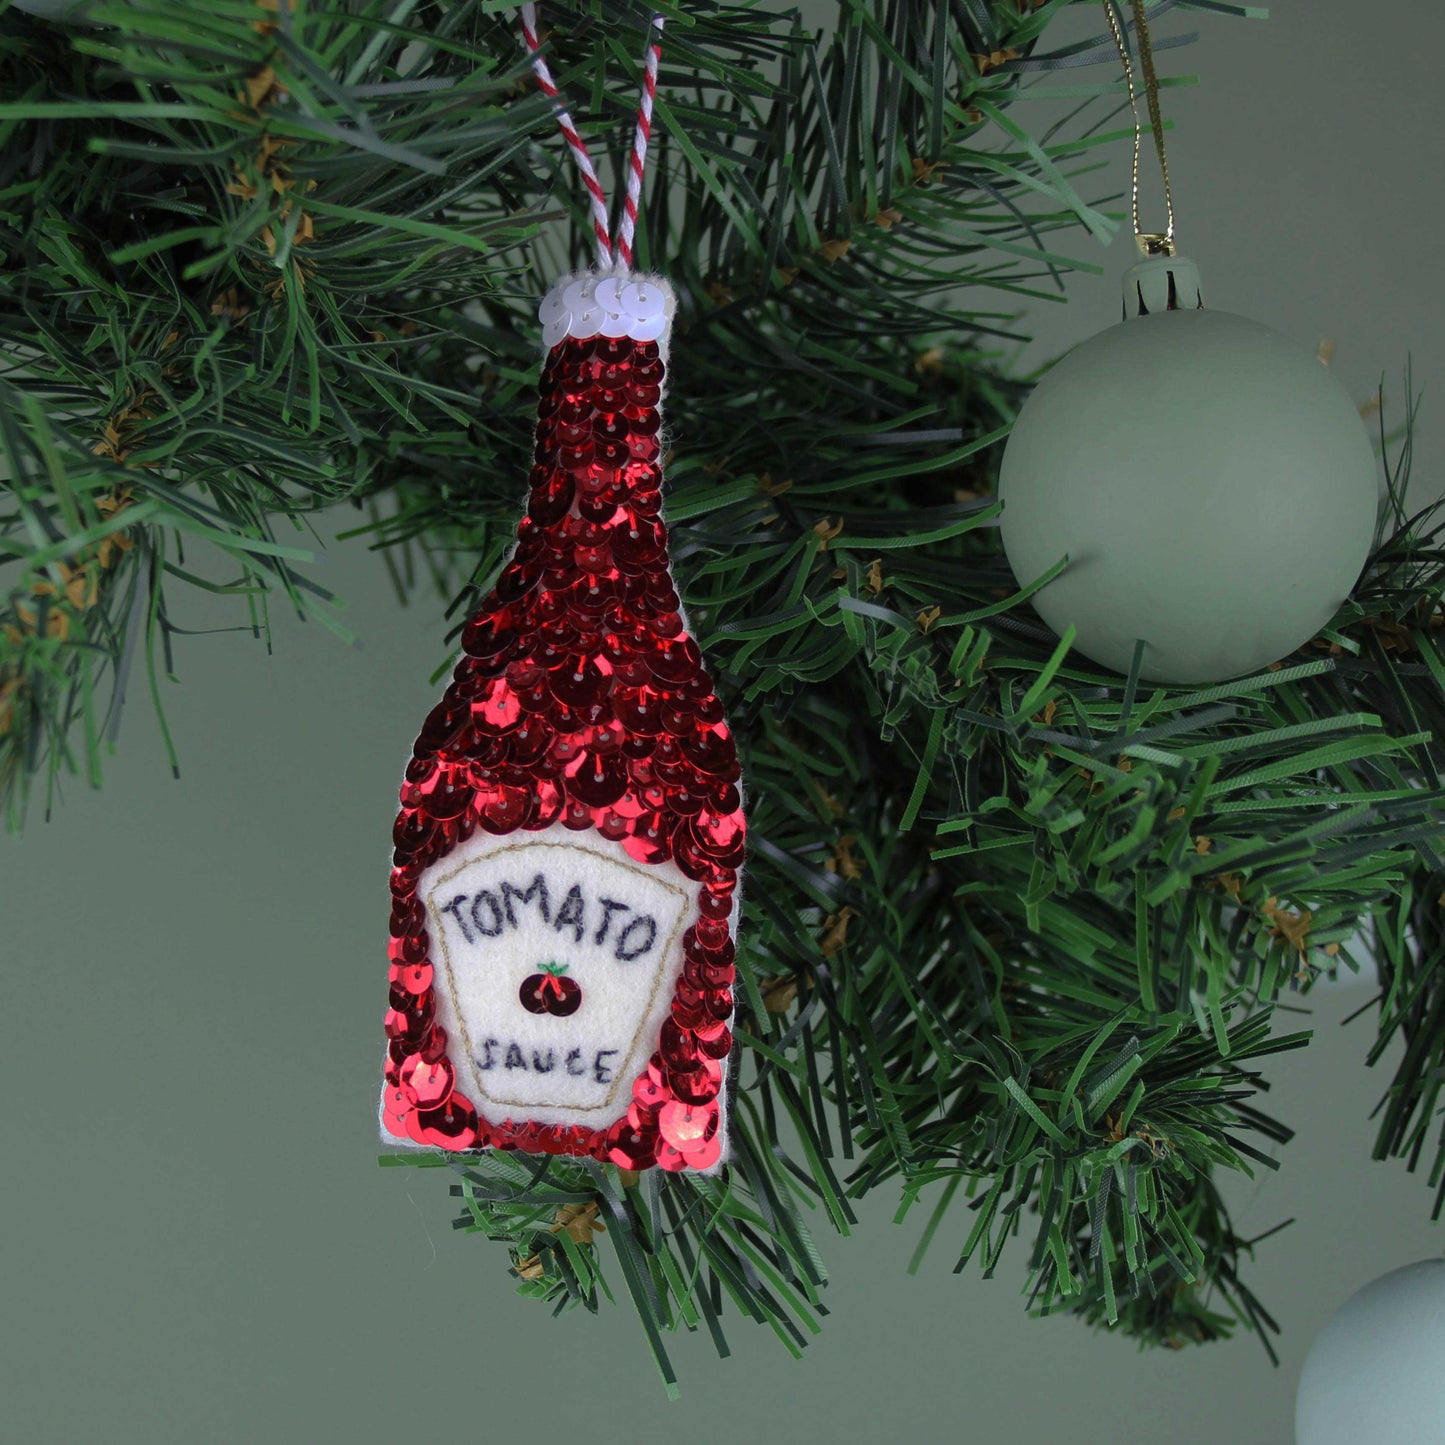 Ketchup Sequin Hanging Ornament, a red sequin ketchup bottle hanging on a green tree